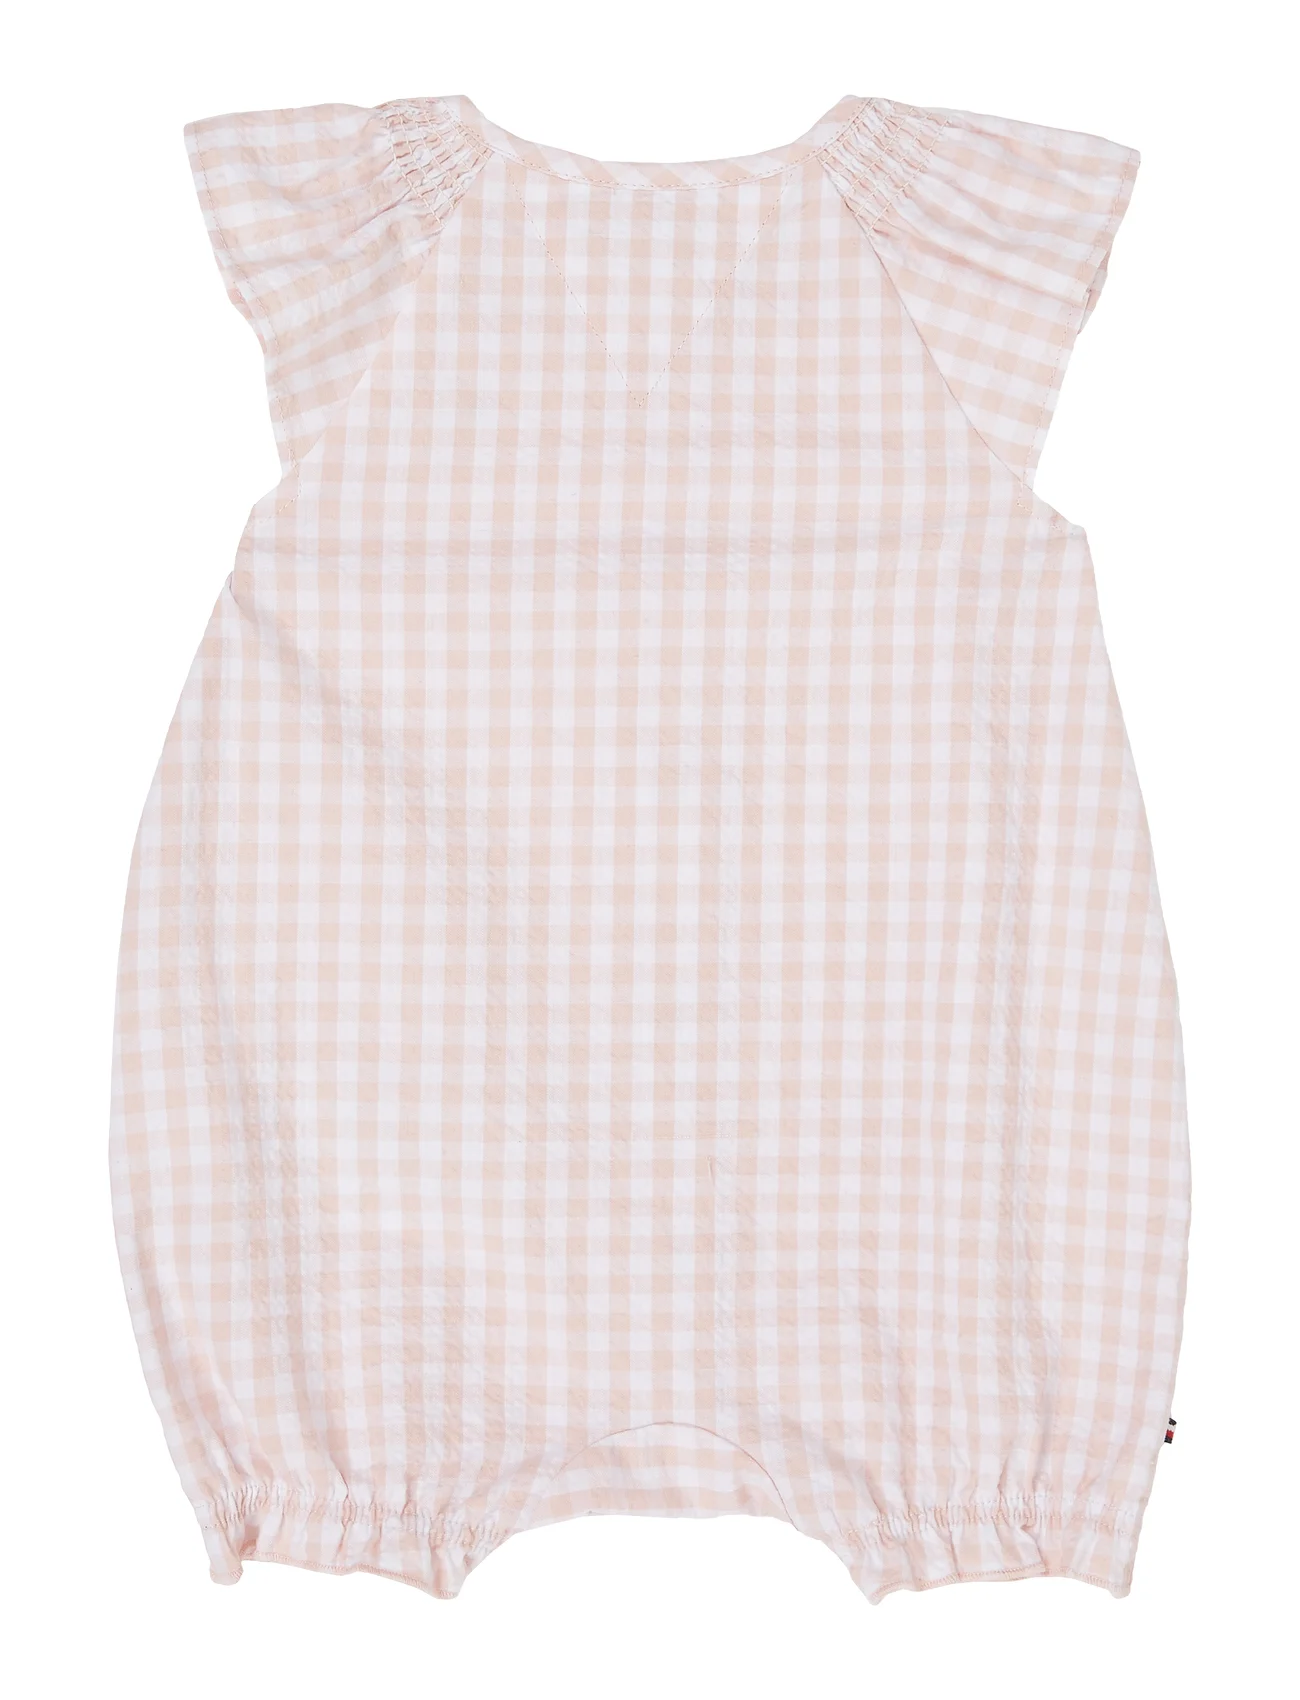 Tommy Hilfiger - BABY RUFFLE GINGHAM SHORTALL - bodysuits - white / pink check - 1